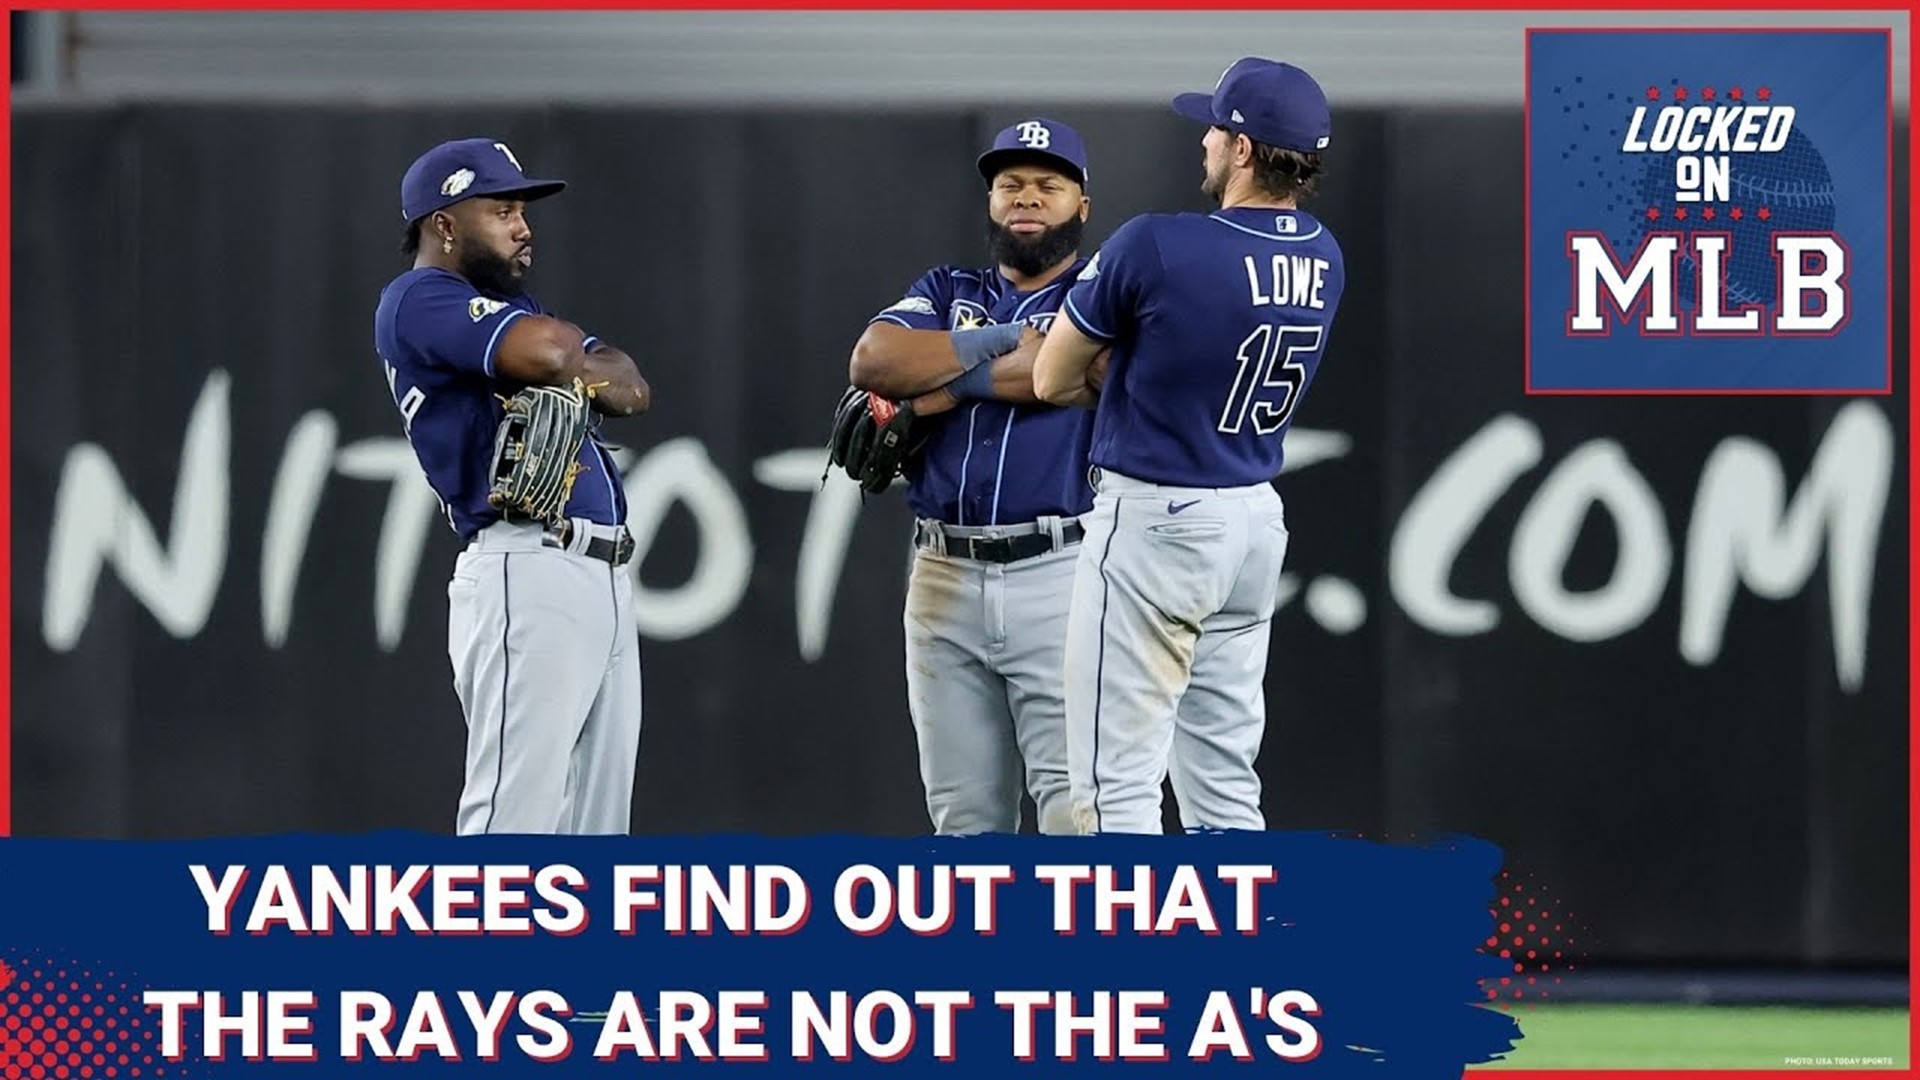 Locked on MLB - The Parallels and Differences Between the Rays and the A's